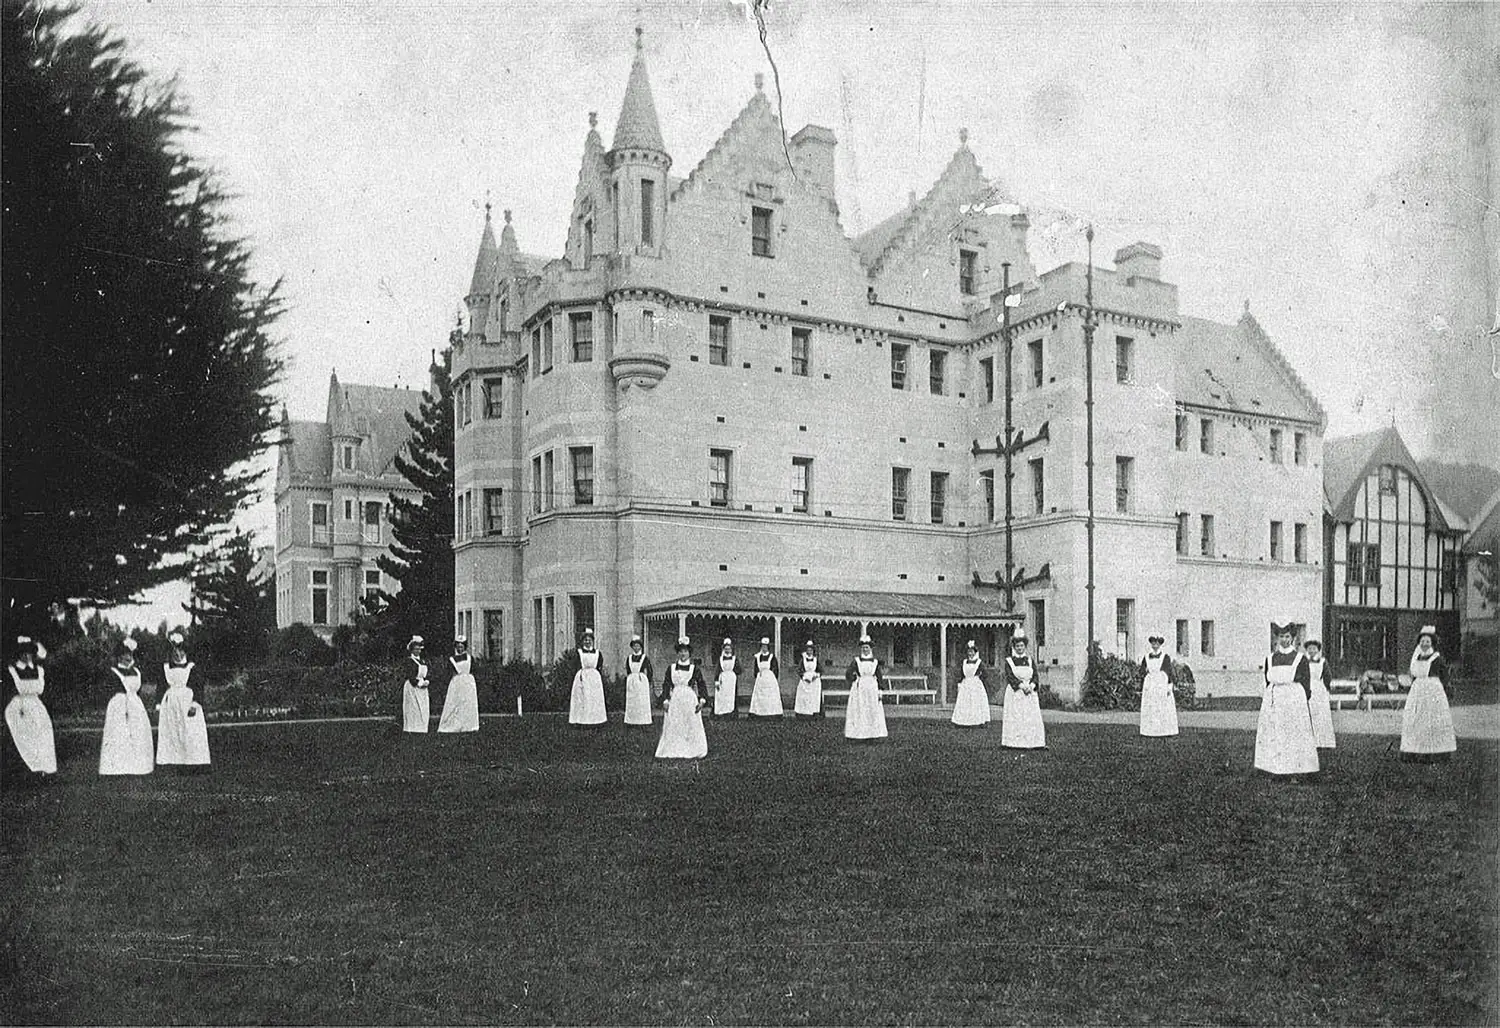 Nurses in white gowns stand spread on the lawn in front of an old castle-like structure that is the Seacliff Asylum.